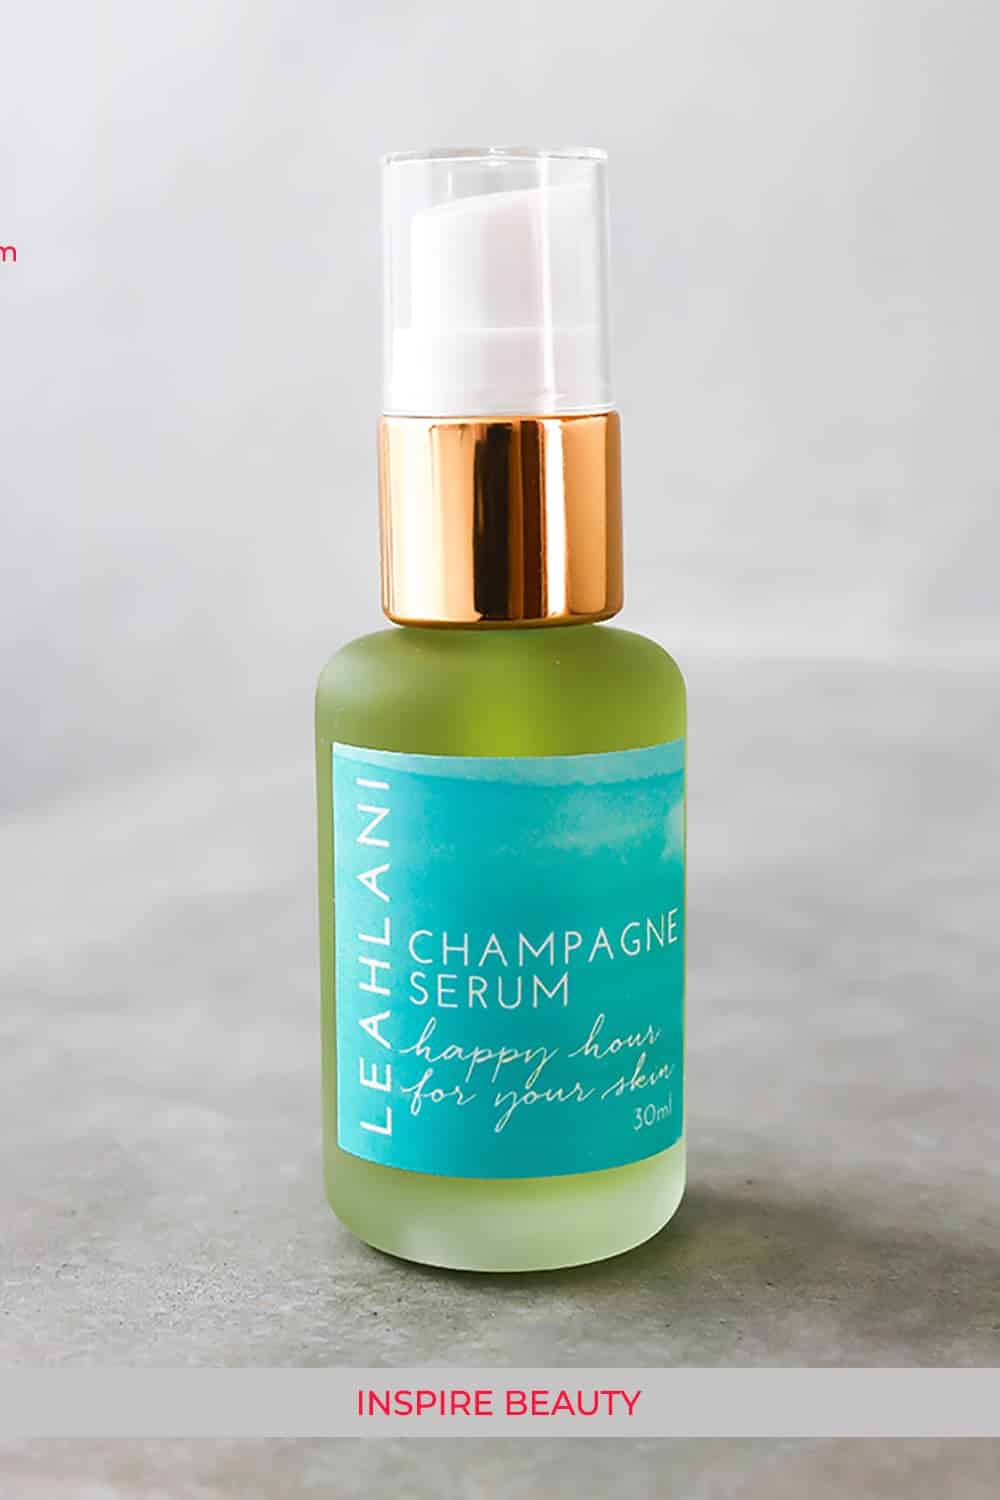 My favourite Leahlani product. Happy Hour Balancing Serum reduces redness, irritation, and brings your skin back to balance